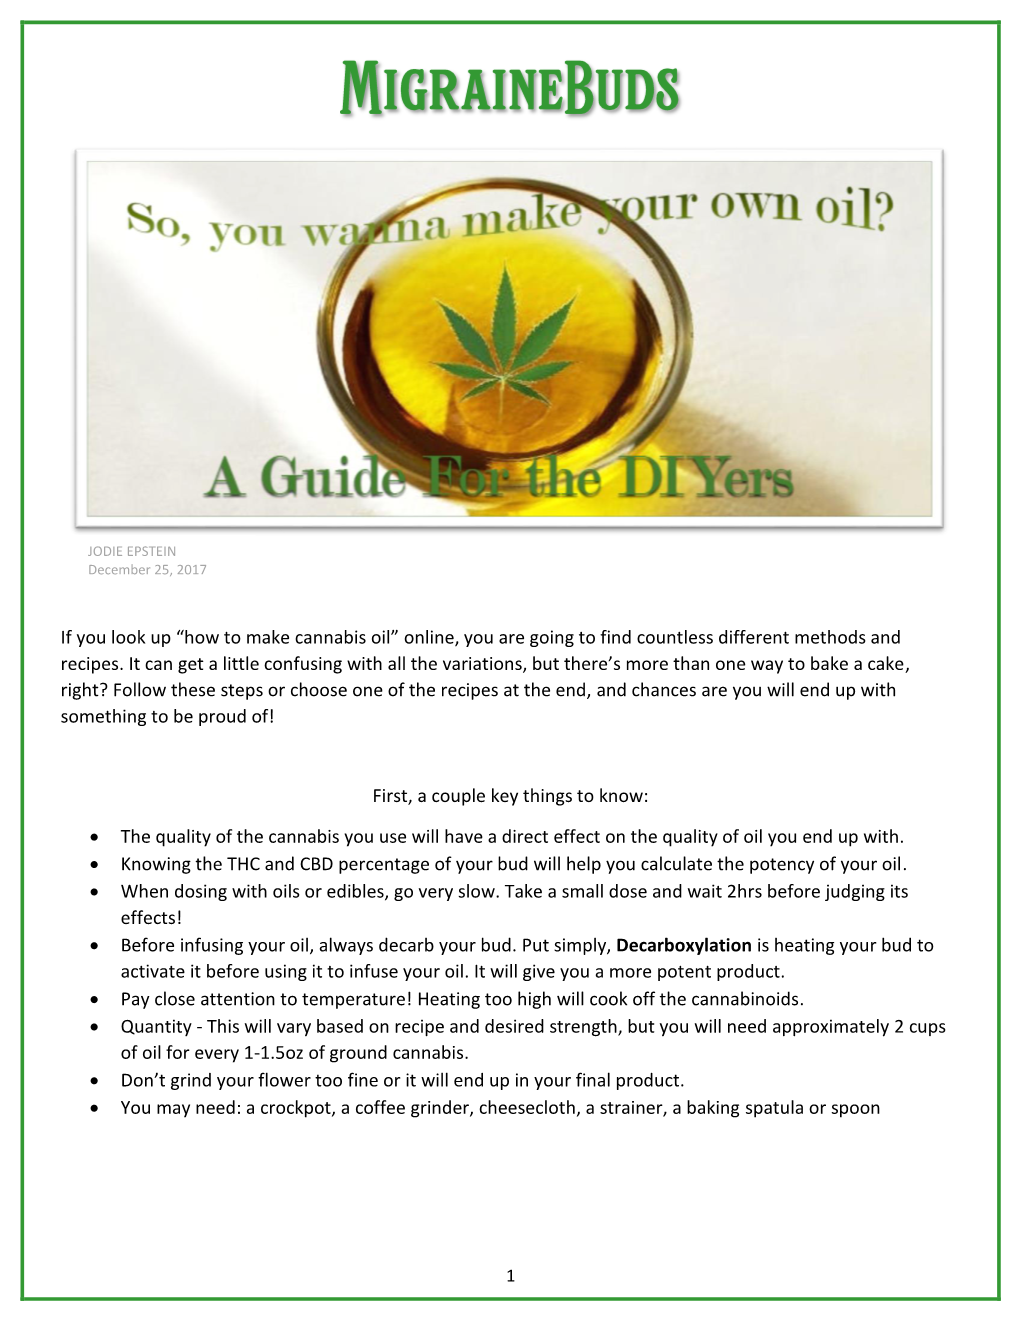 How to Make Cannabis Oil” Online, You Are Going to Find Countless Different Methods and Recipes